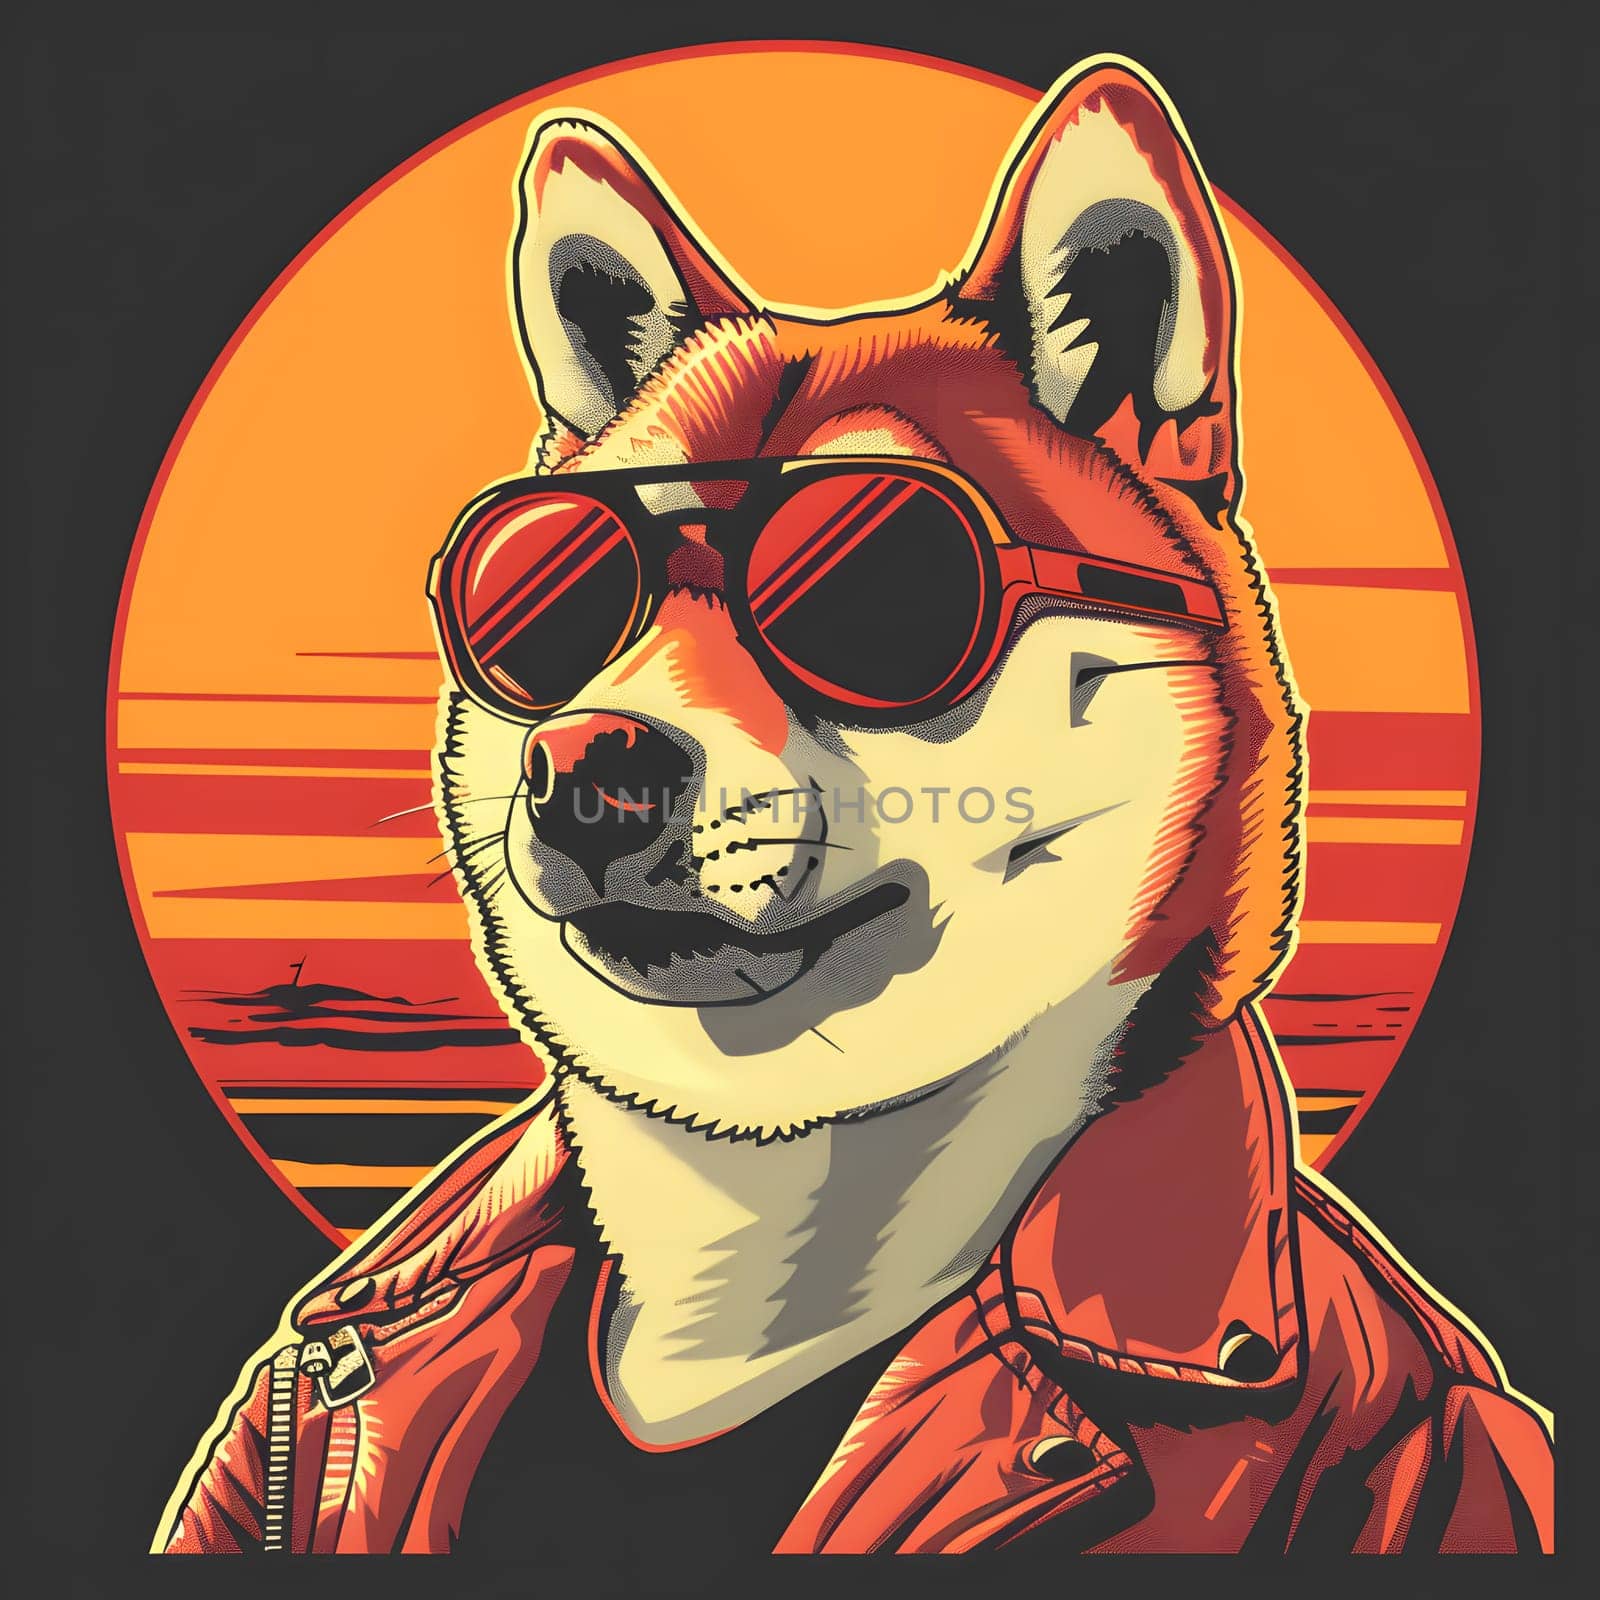 A canine sporting stylish sunglasses and a trendy leather jacket, showcasing a fashionable and cool look. This artwork blends vision care with carnivore style